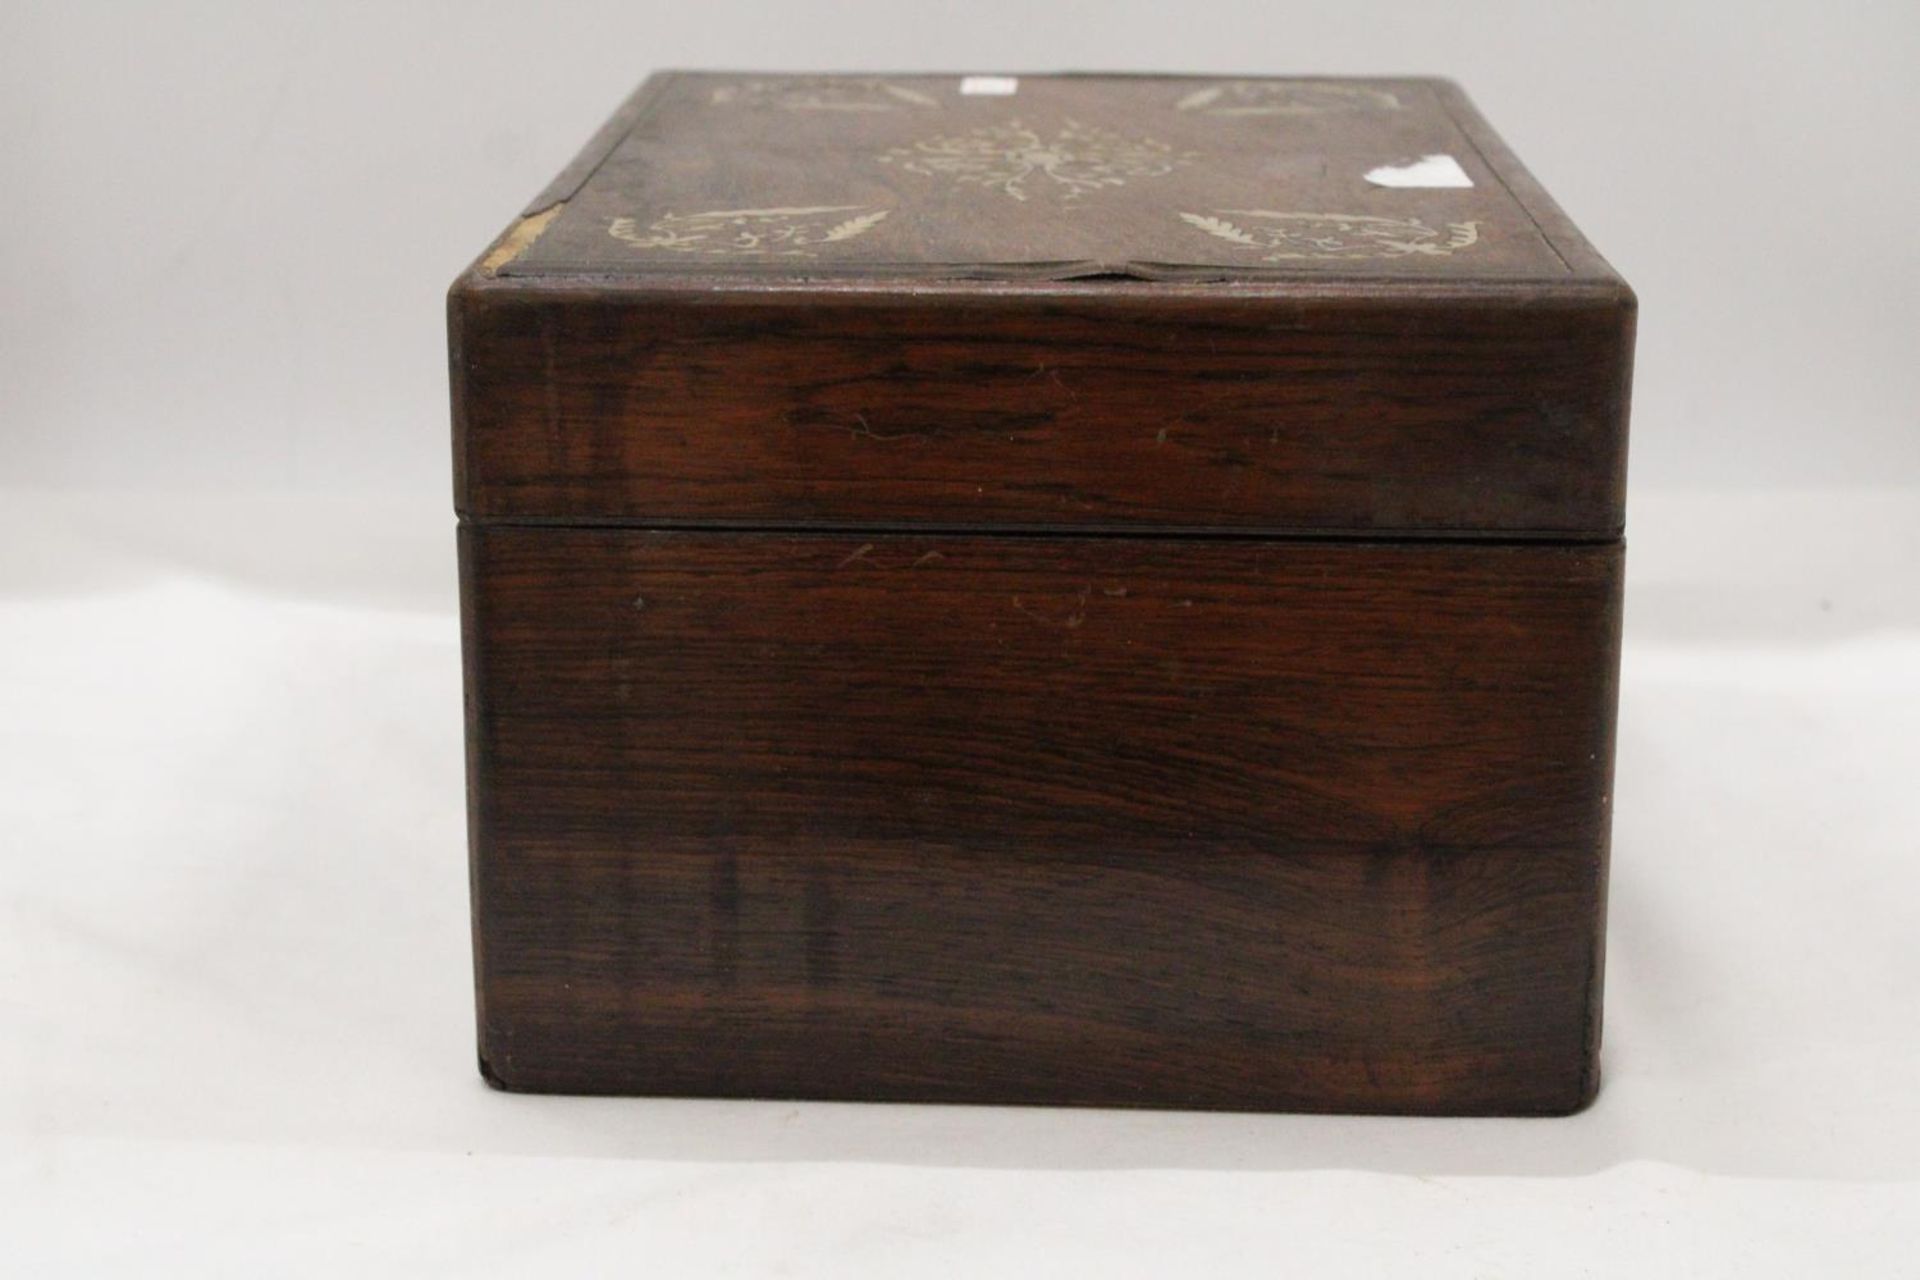 A VINTAGE MAHOGANY WORK BOX WITH MOTHER OF PEARL INLAY - Image 5 of 6